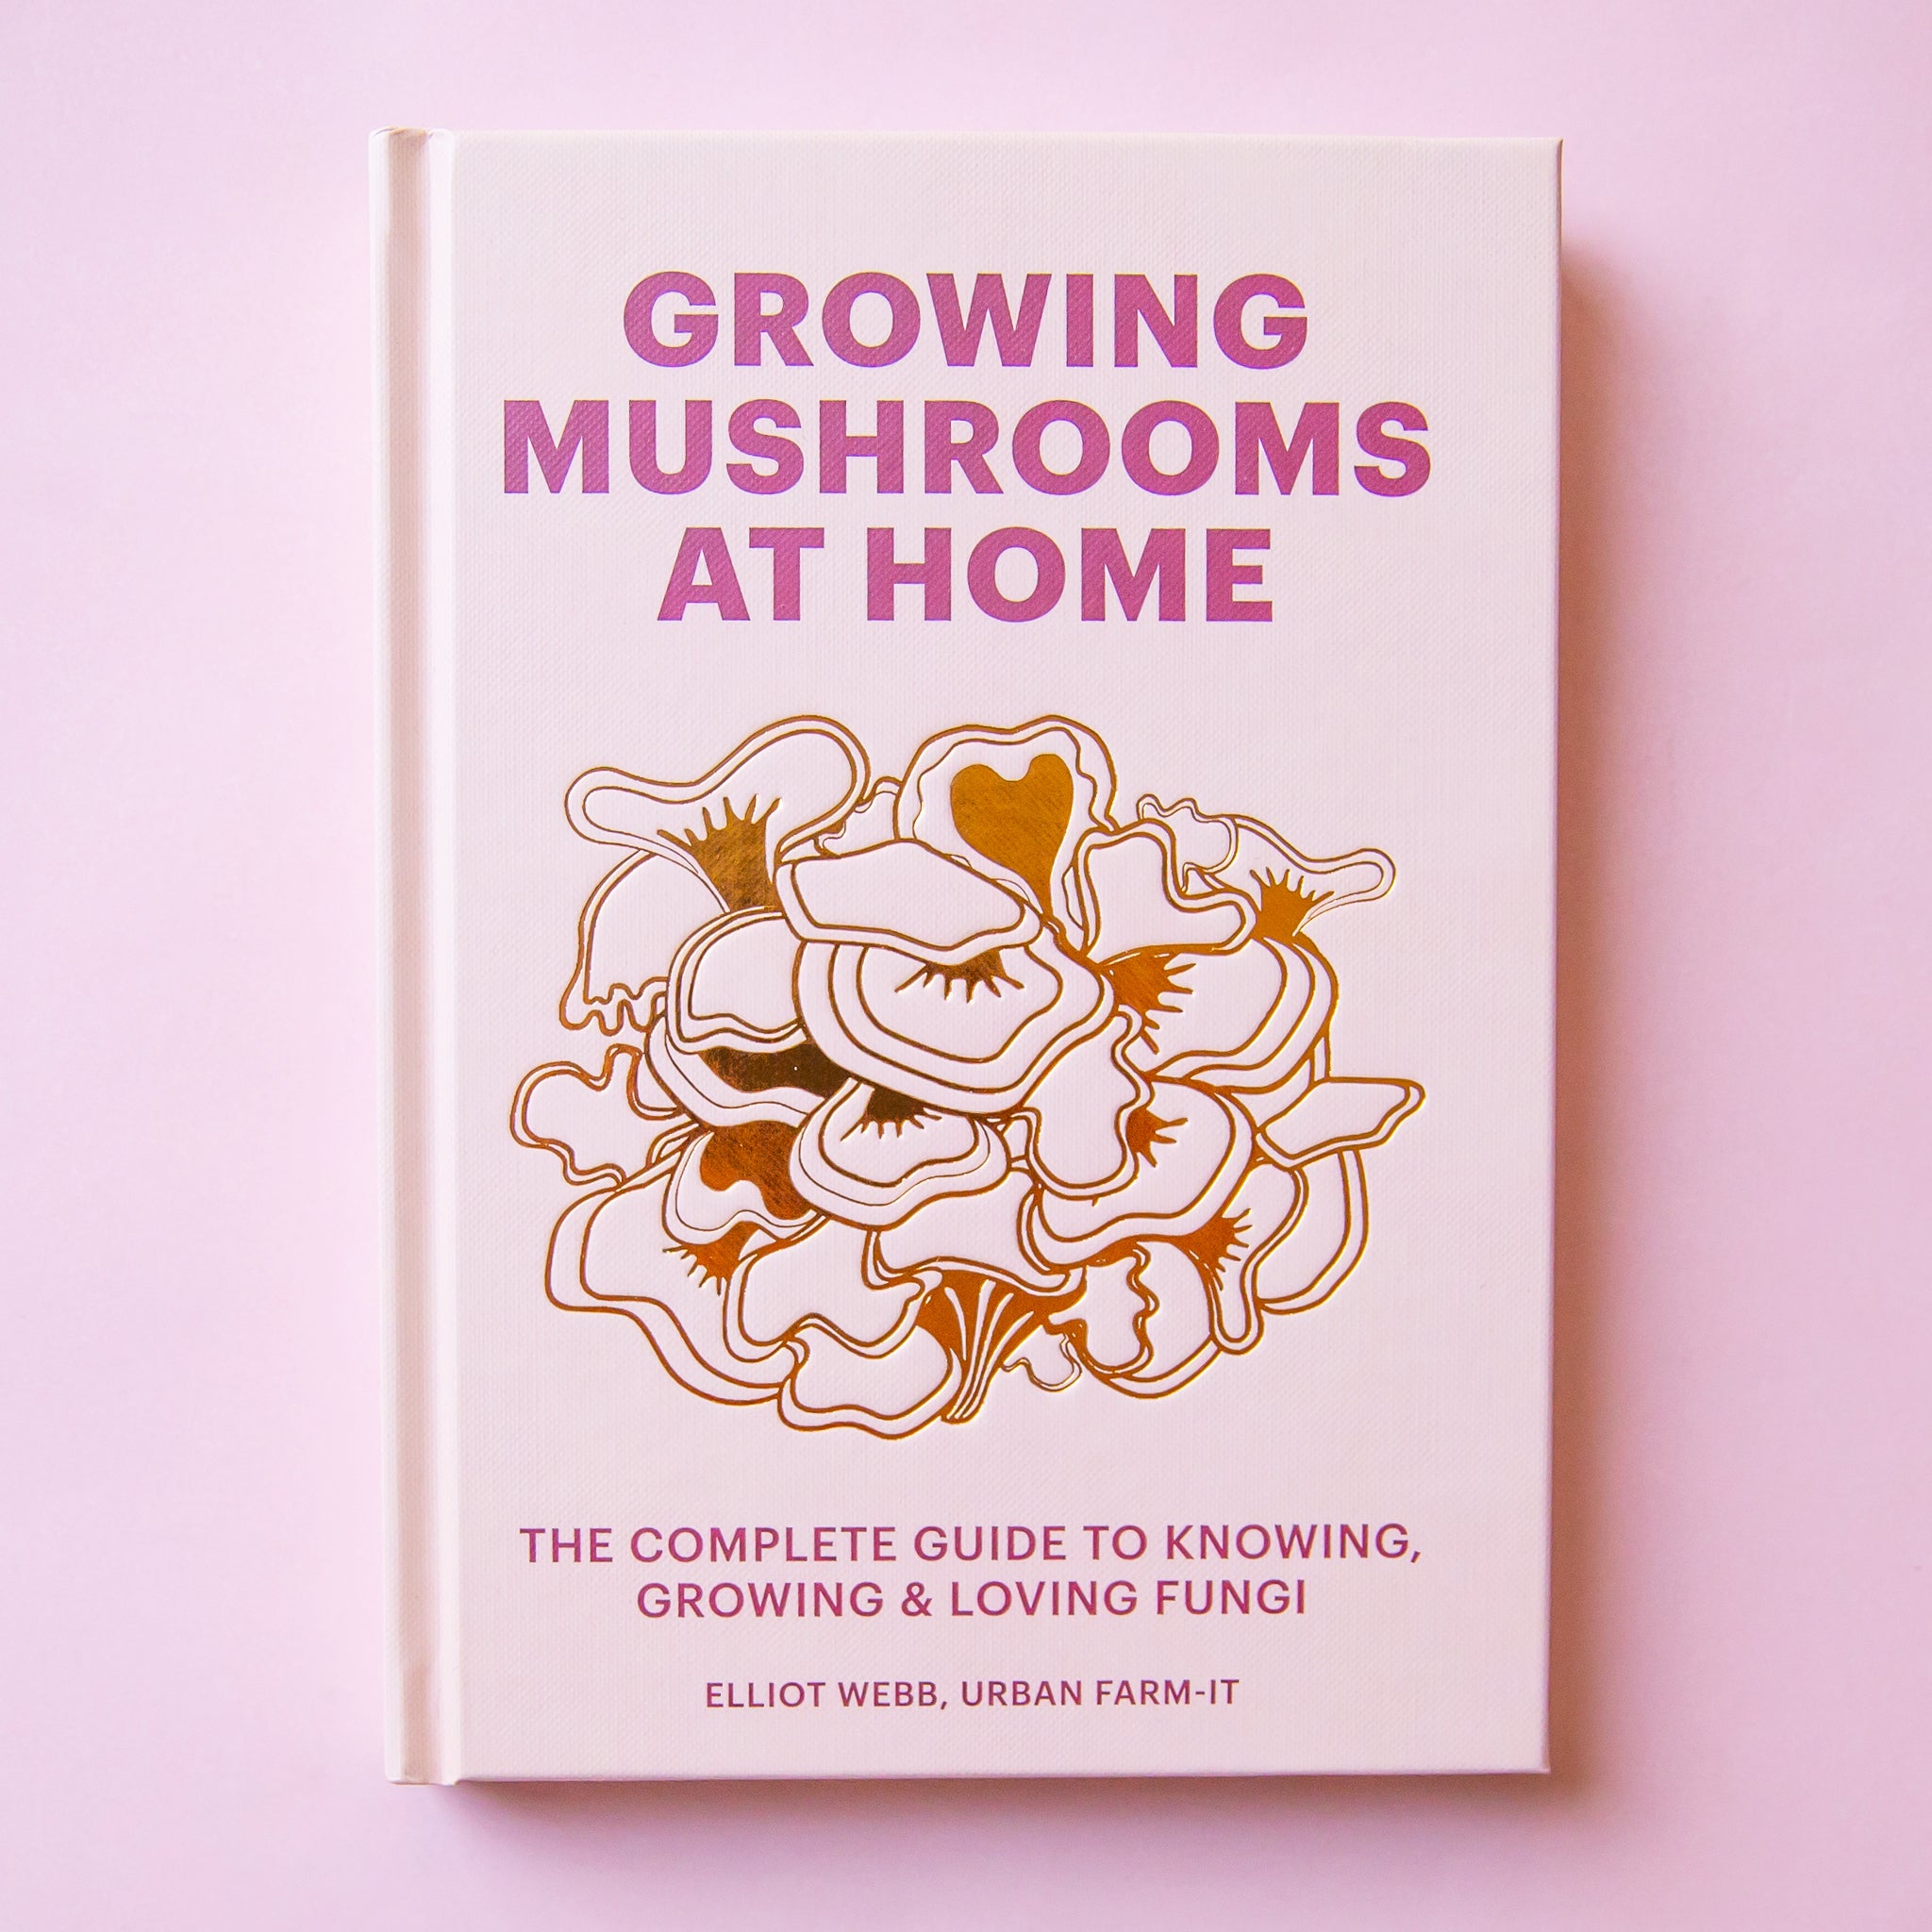 On a light purple background is a book cover with purple title that reads, "Growing Mushrooms At Home" along with a graphic of mushrooms in the center. 